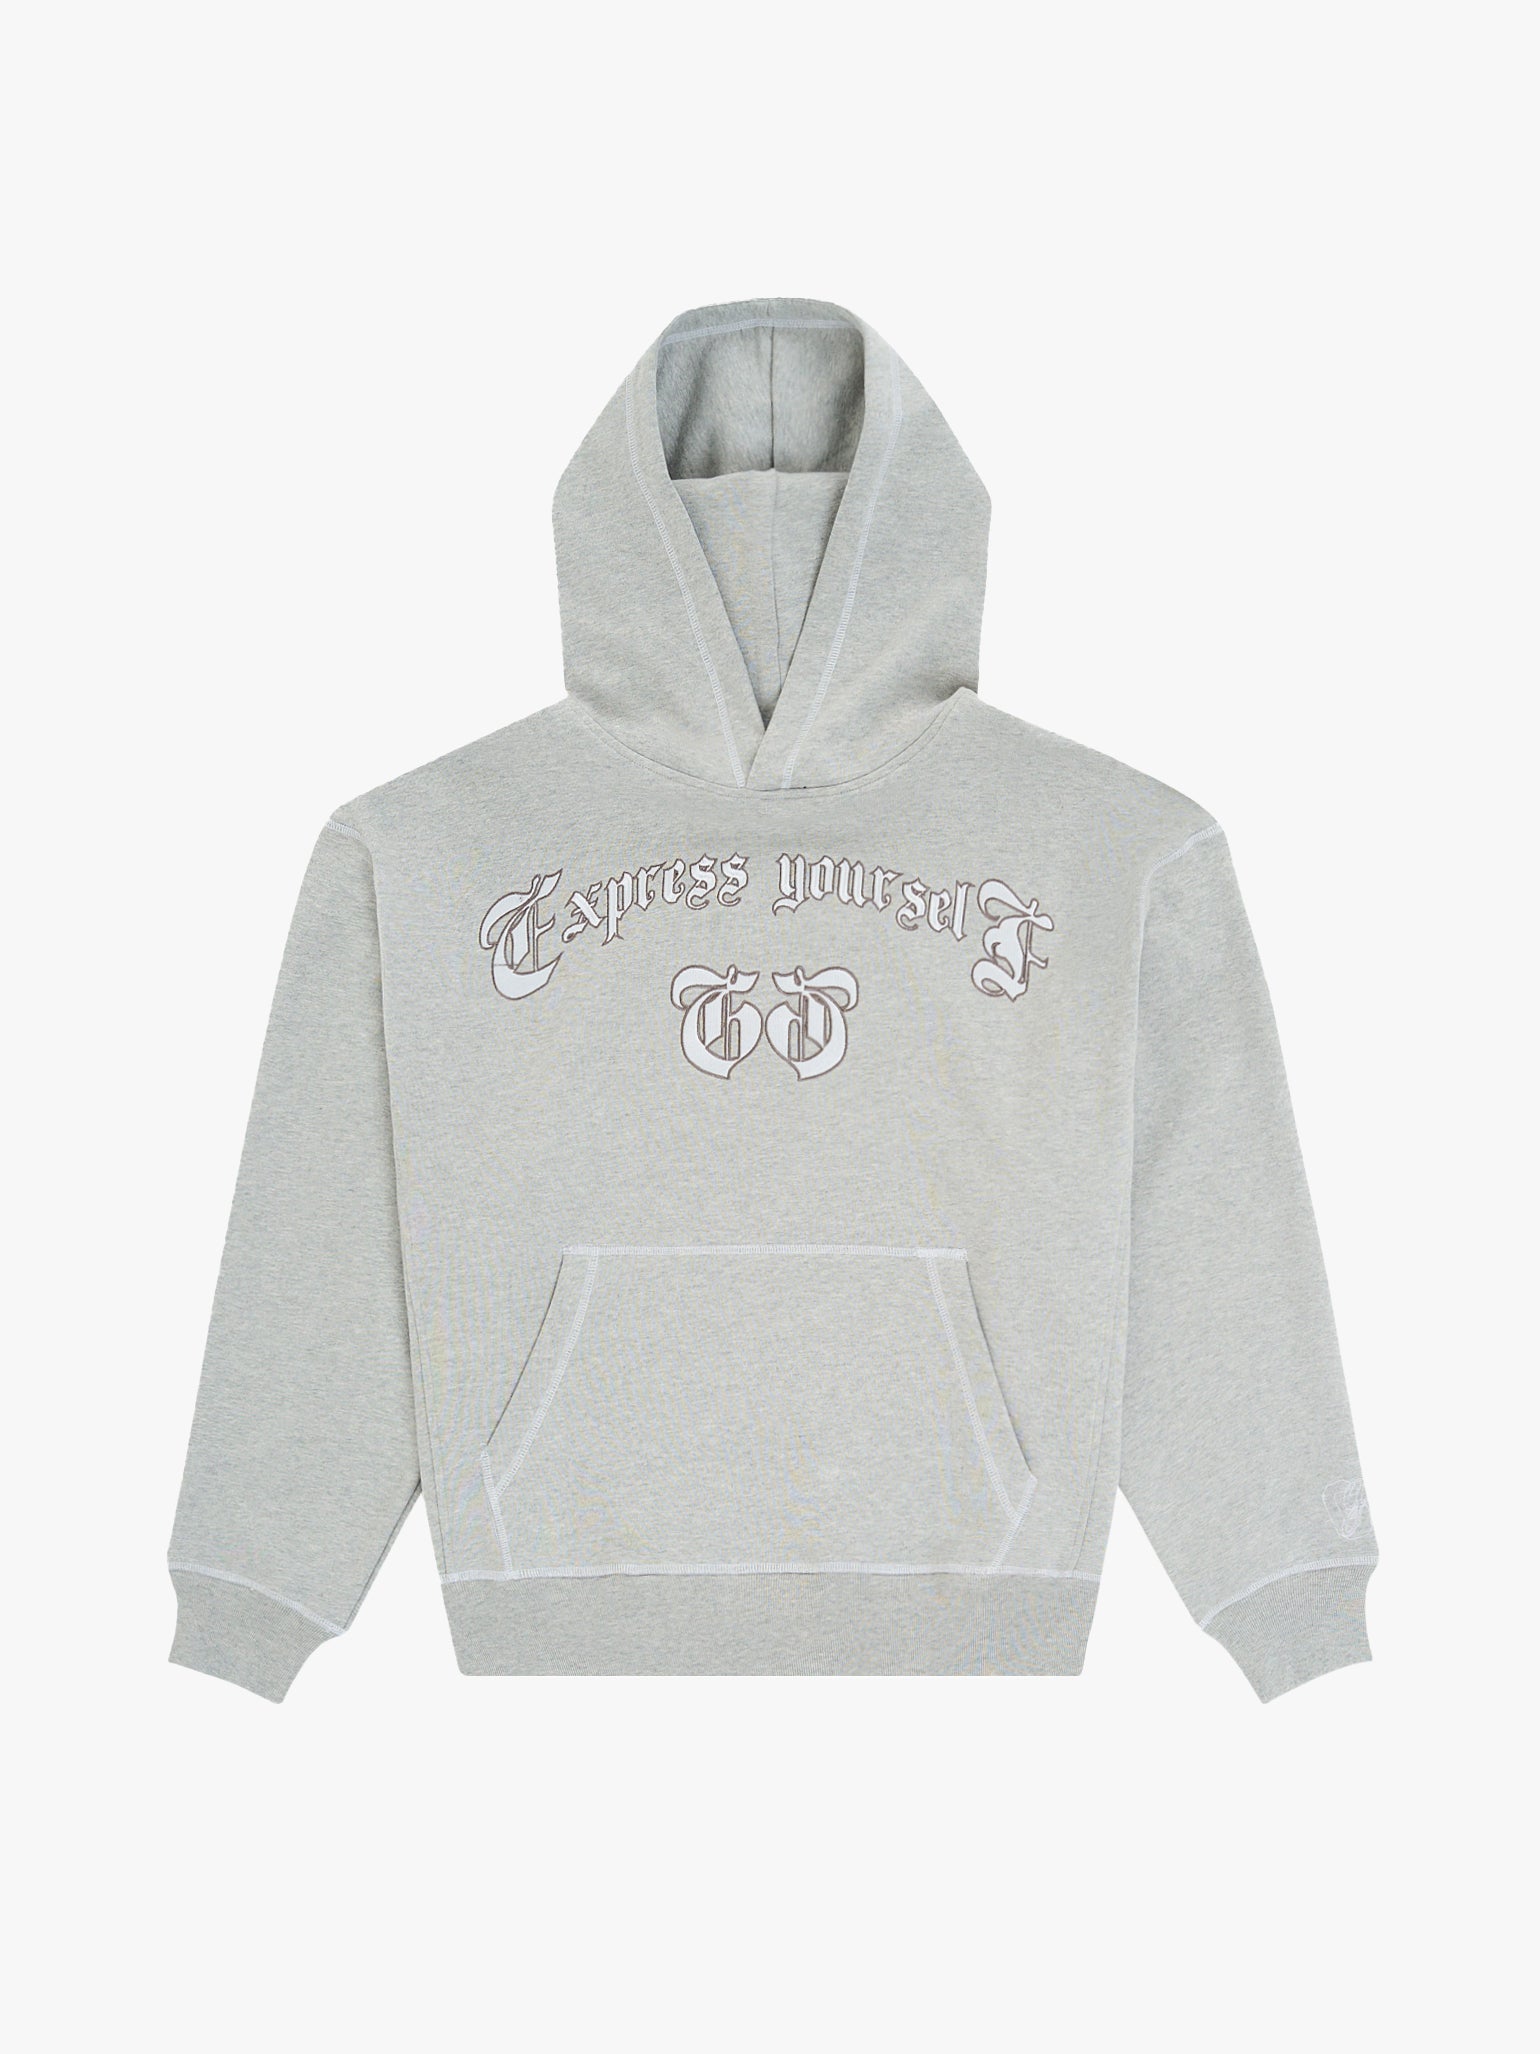 EXPRESS YOURSELF HOODIE - GREY